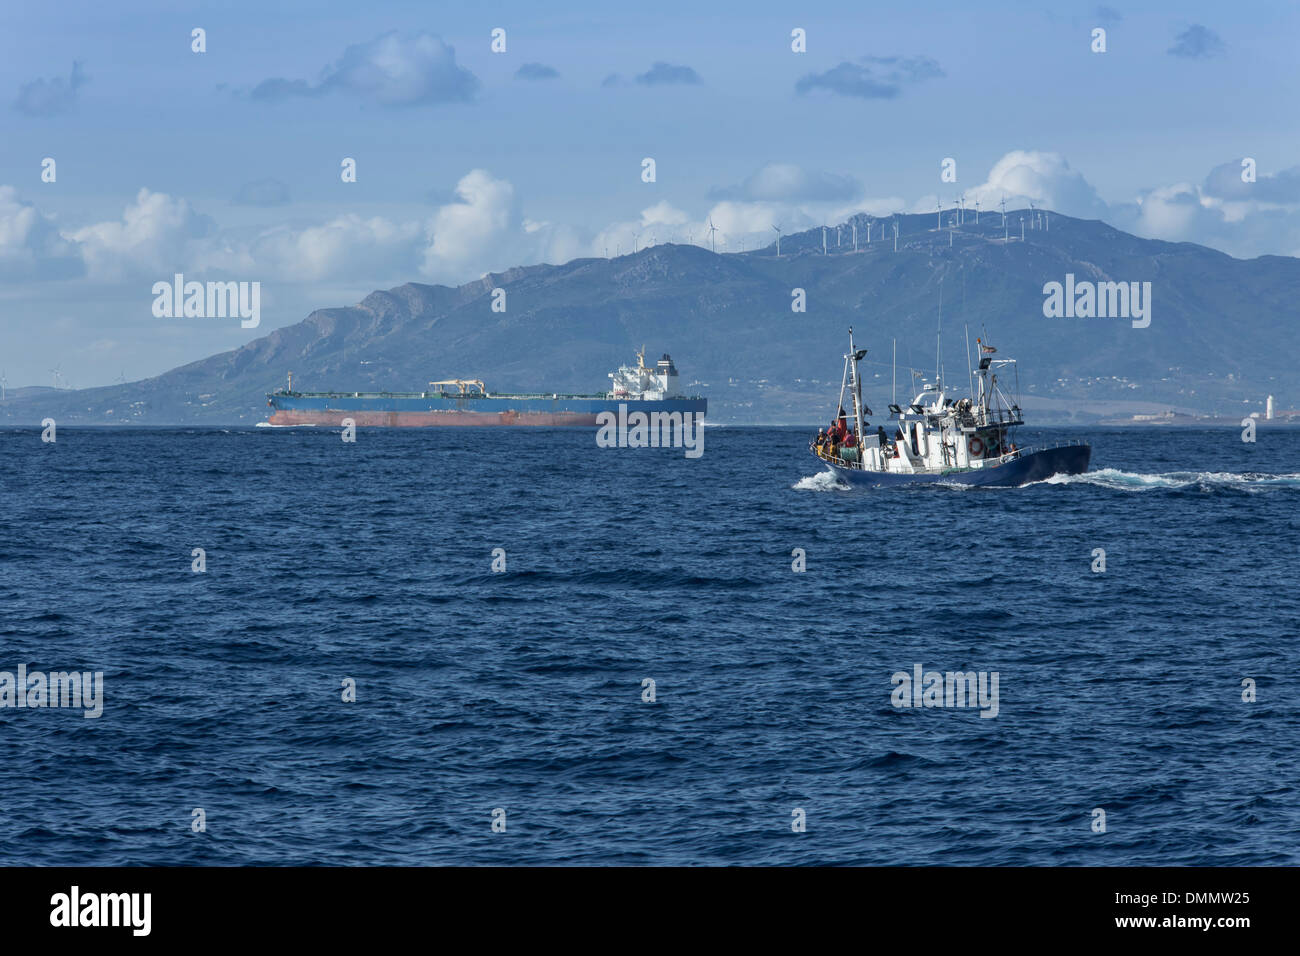 Spain, Andalusia, Tarifa, Oil tanker and Spanish fishing boat on the ocean Stock Photo